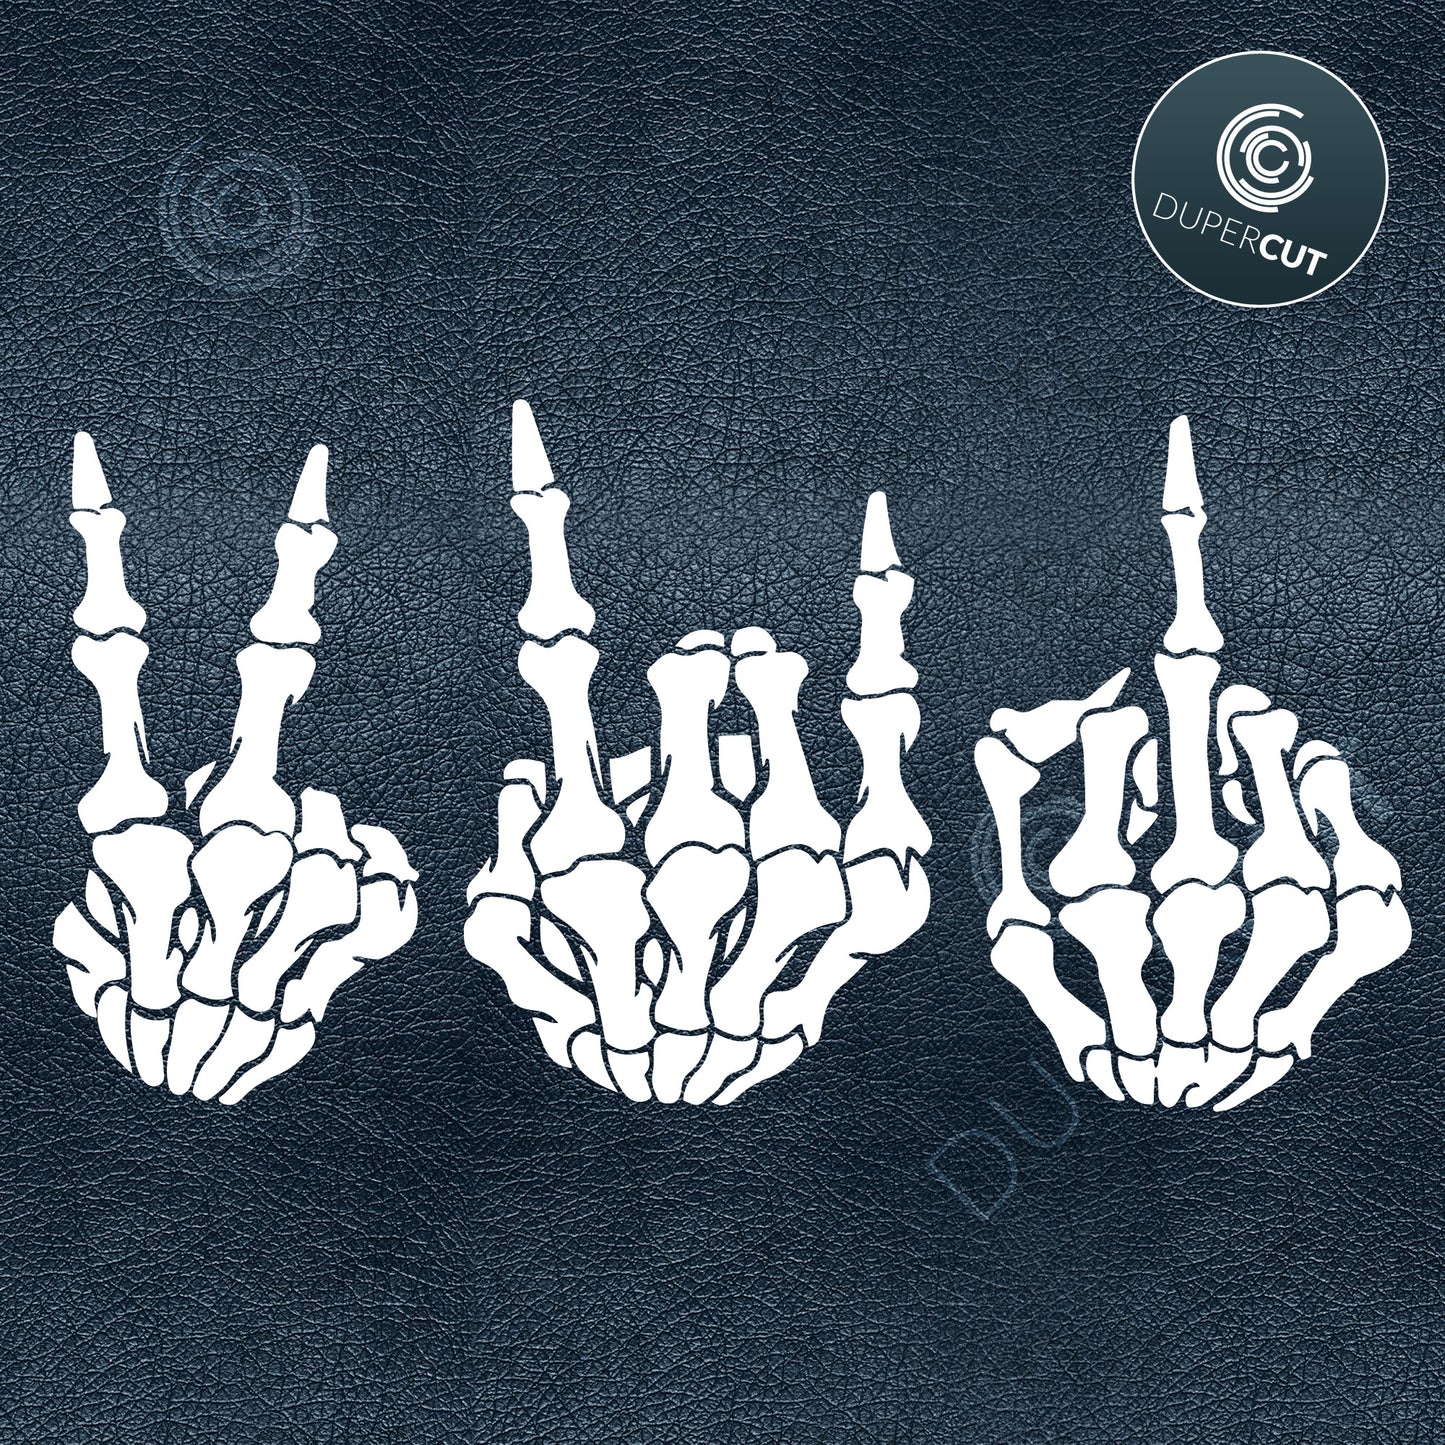 Skeleton hand gestures, cross stitch stencil design. SVG PNG DXF cutting files for Cricut, Silhouette, Glowforge, print on demand, sublimation templates